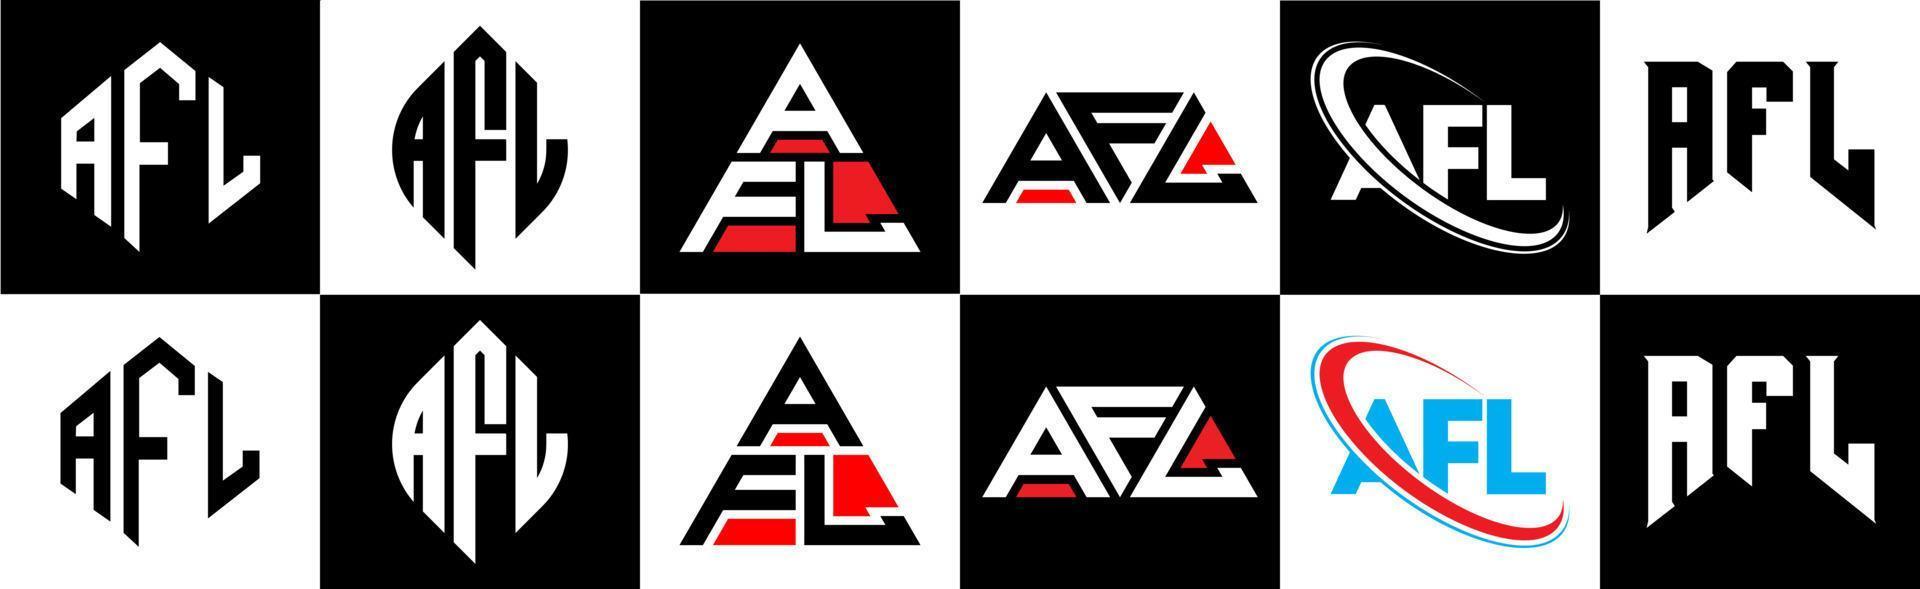 AFL letter logo design in six style. AFL polygon, circle, triangle, hexagon, flat and simple style with black and white color variation letter logo set in one artboard. AFL minimalist and classic logo vector